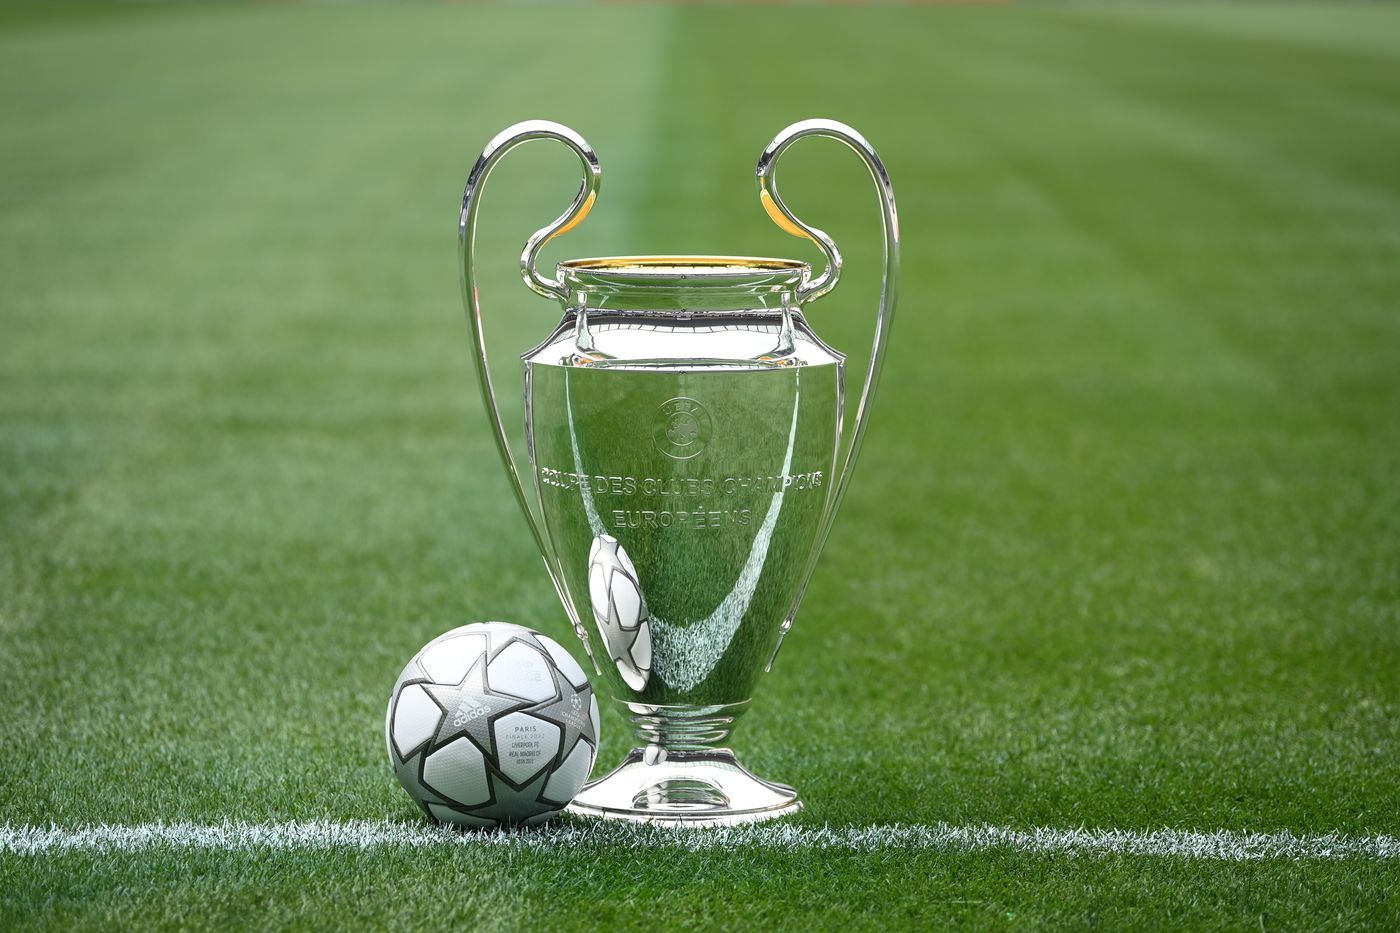 UEFA Champions League First Round of 16 Predictions: Team Preview, Fixtures, Odds, and Where to Watch